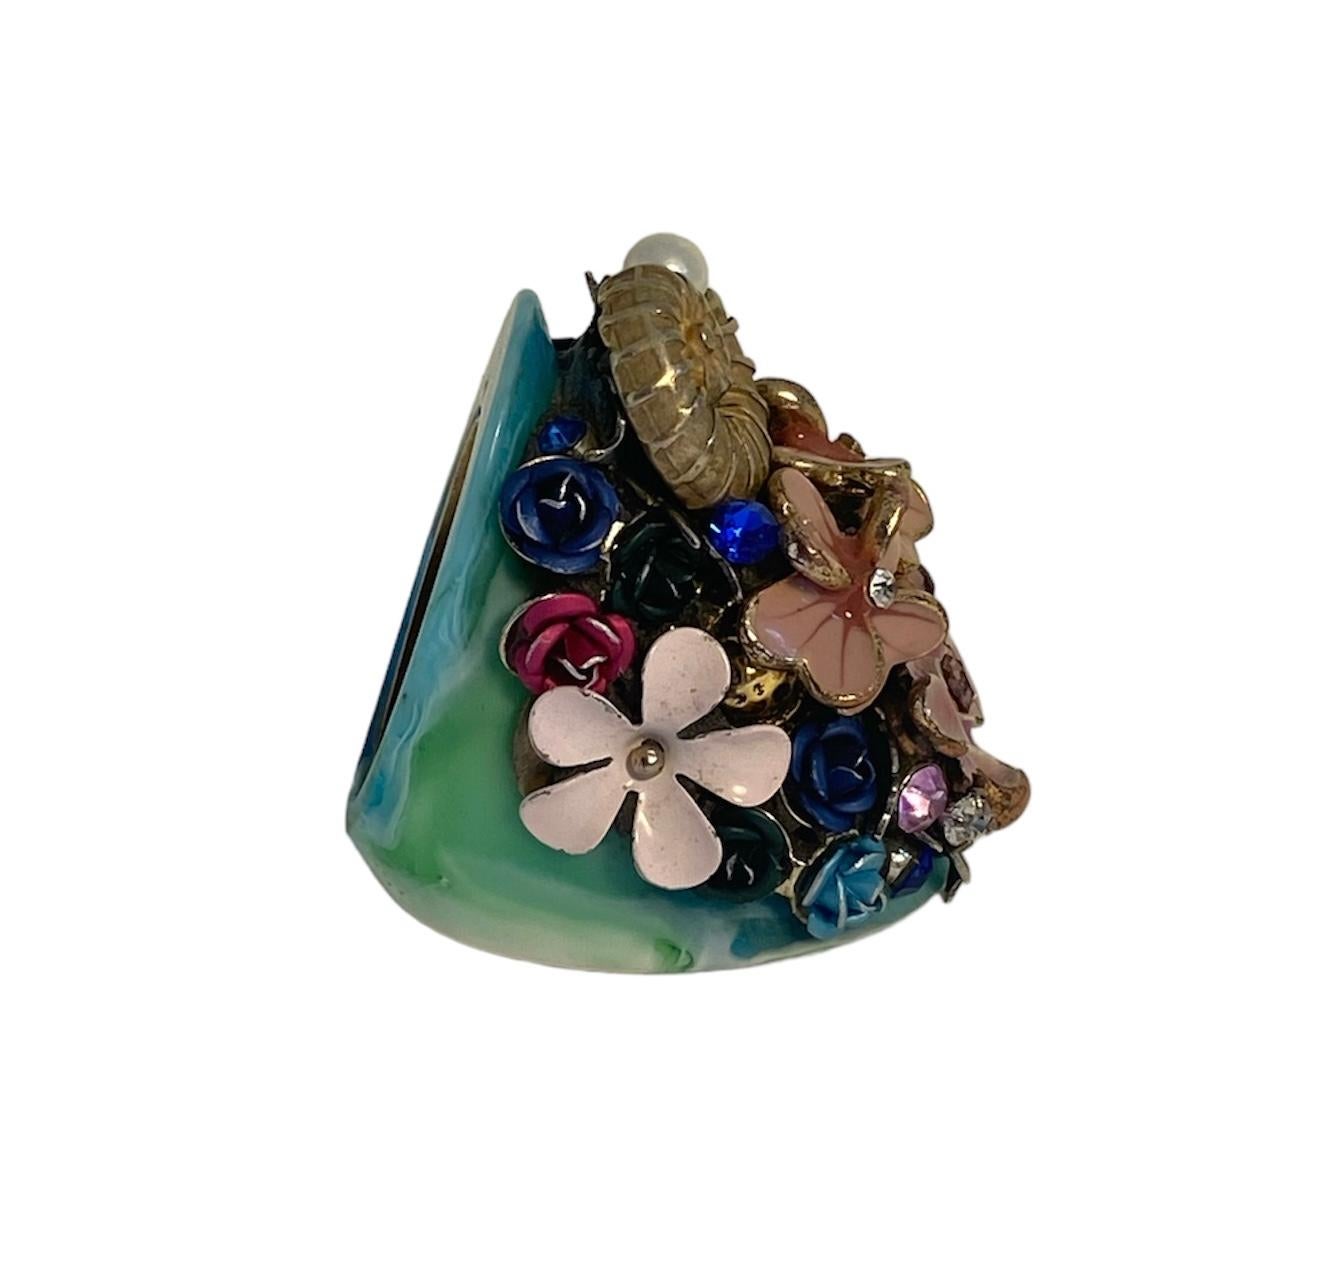 Women's One Off Ring. Handmade & High Upcycling. Bronze, Resin & Vintage Elements. 20mm. For Sale